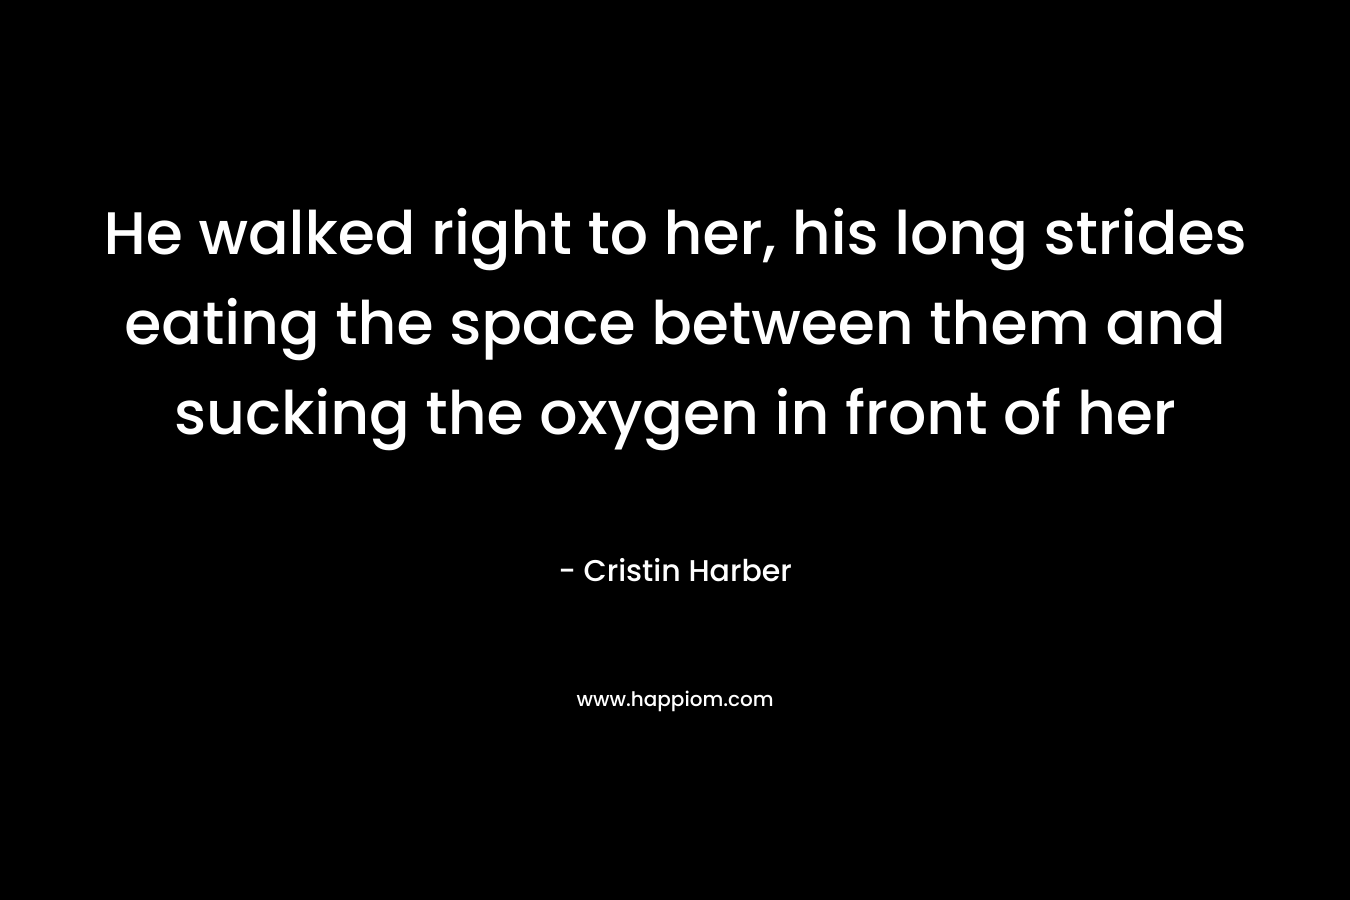 He walked right to her, his long strides eating the space between them and sucking the oxygen in front of her – Cristin Harber